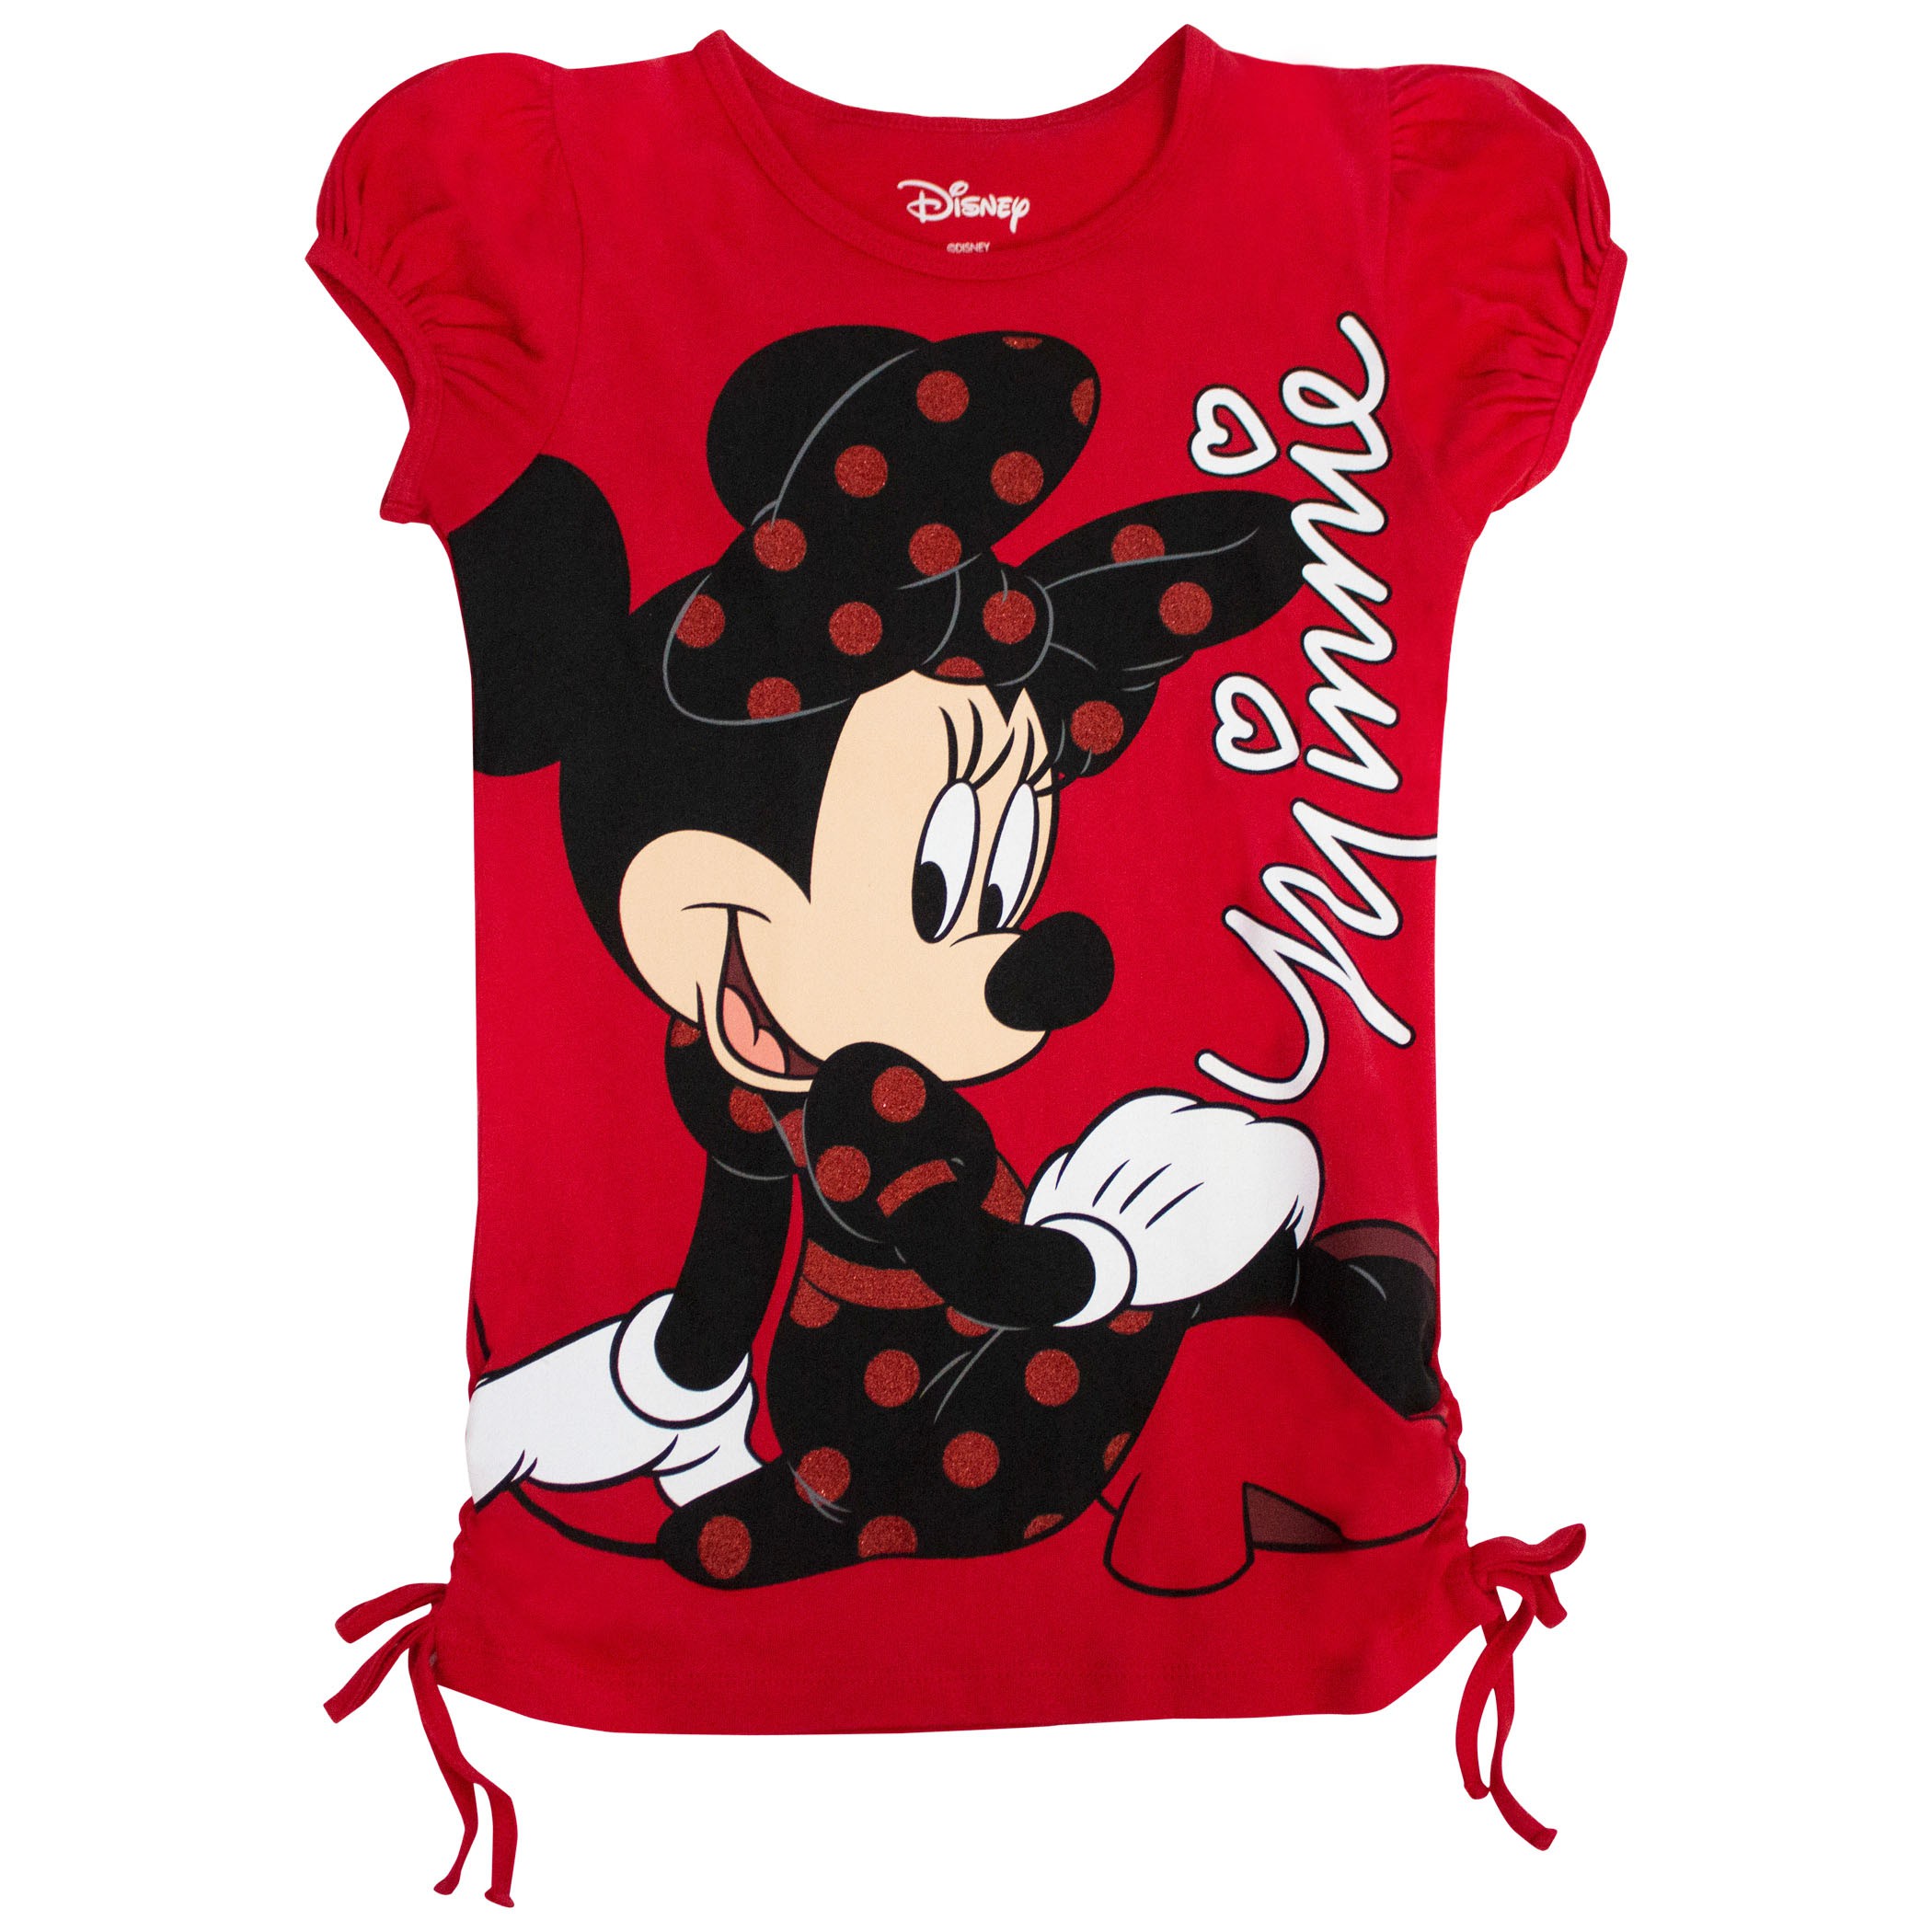 Minnie Mouse Black Bow Red Youth Girl's Tee Shirt